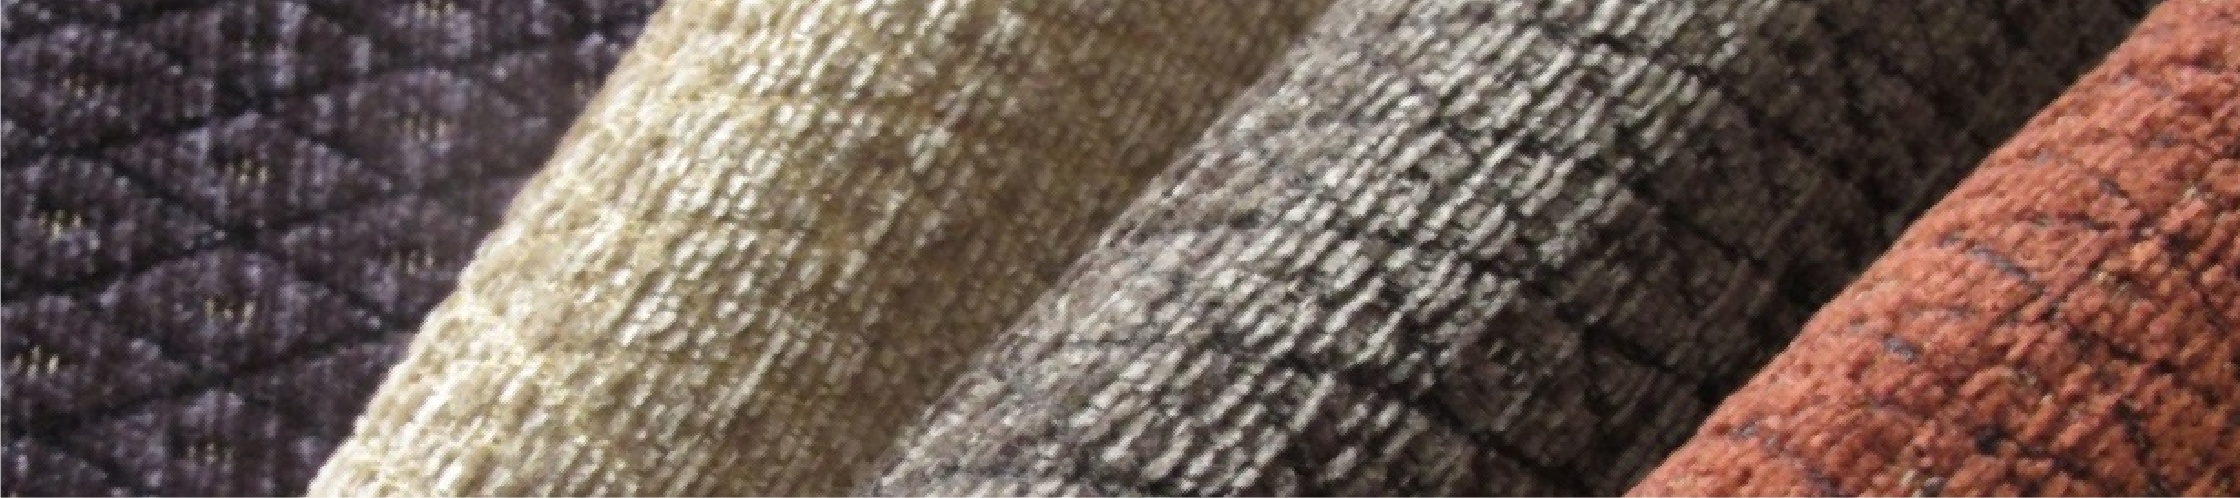 patterned upholstery fabric